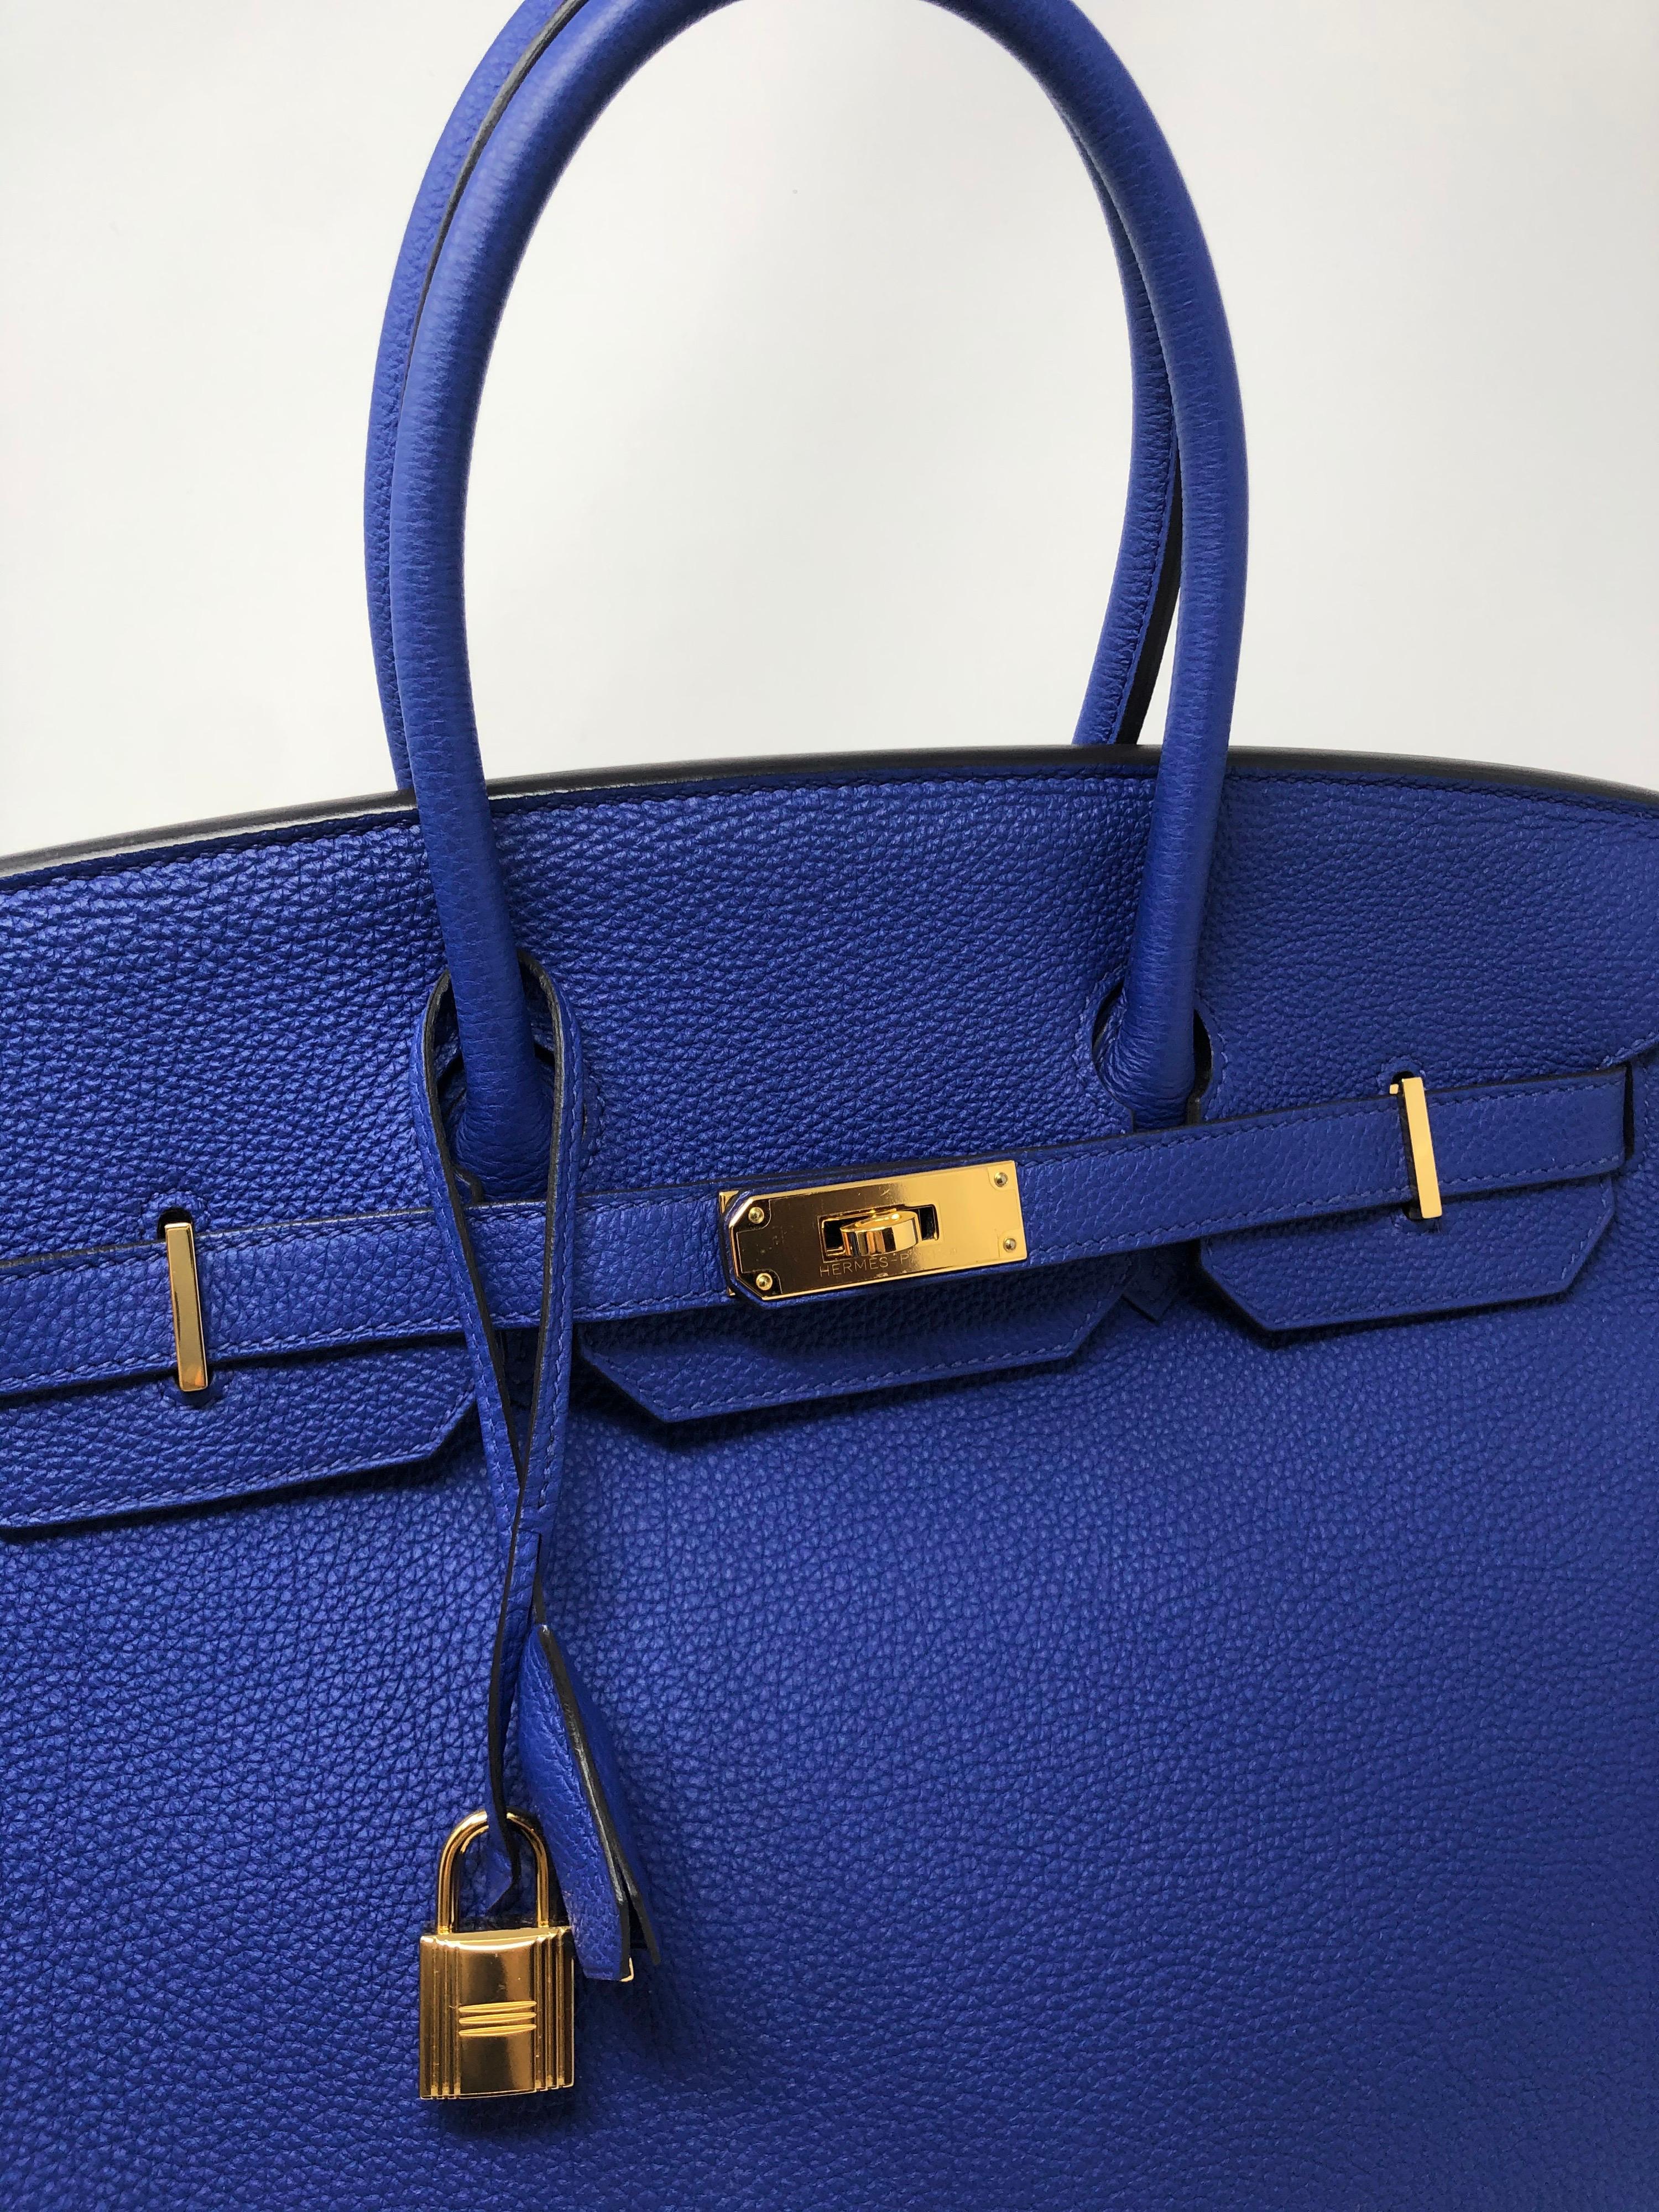 Hermes Bleu Electrique Birkin 35 Togo leather with gold hardware. Absolutely gorgeous. Hard to find color with gold hardware. Mint condition. Looks new. Plastic covering is still on hardware. Full set with box, dust cover, clochette and keys. Don't